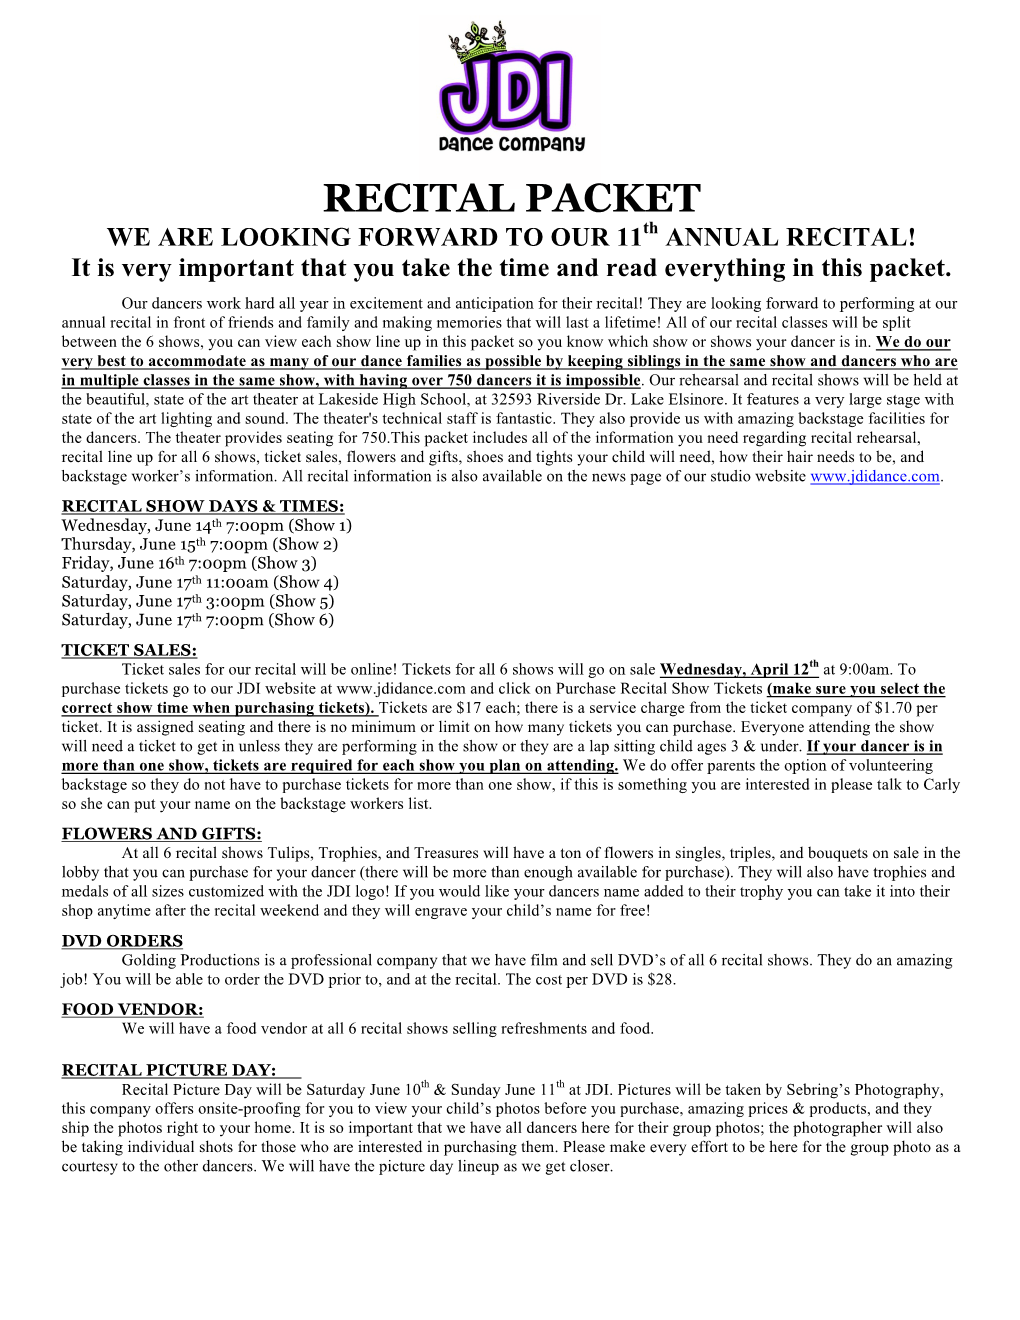 RECITAL PACKET WE ARE LOOKING FORWARD to OUR 11Th ANNUAL RECITAL! It Is Very Important That You Take the Time and Read Everything in This Packet